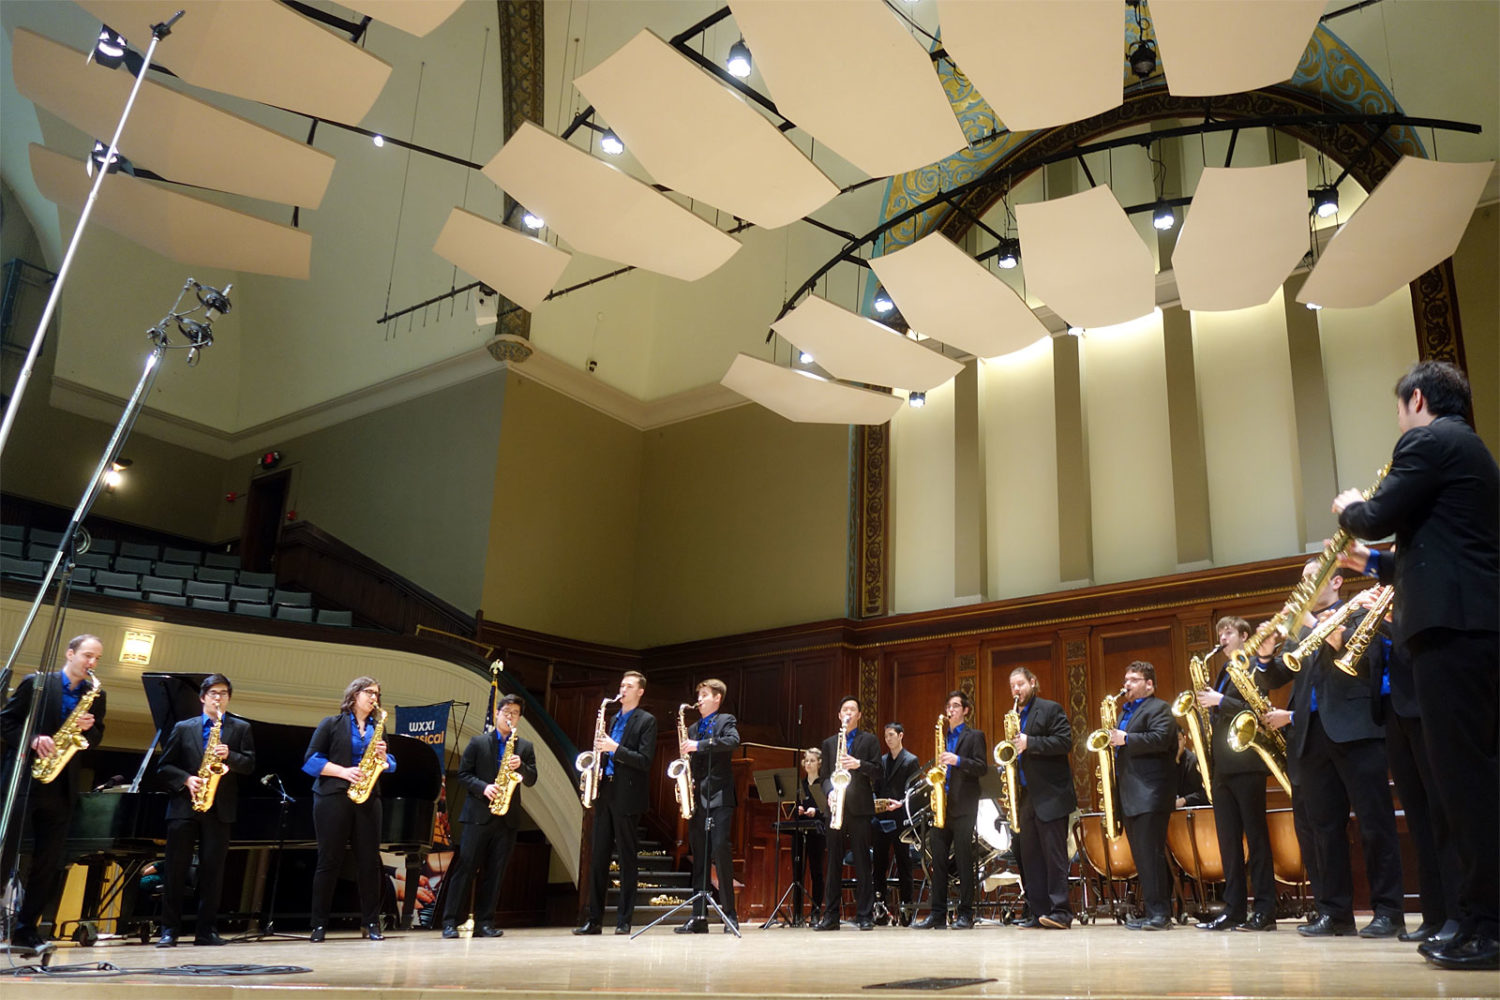 Eastman Saxophone Project performing at Hochstein School of Music